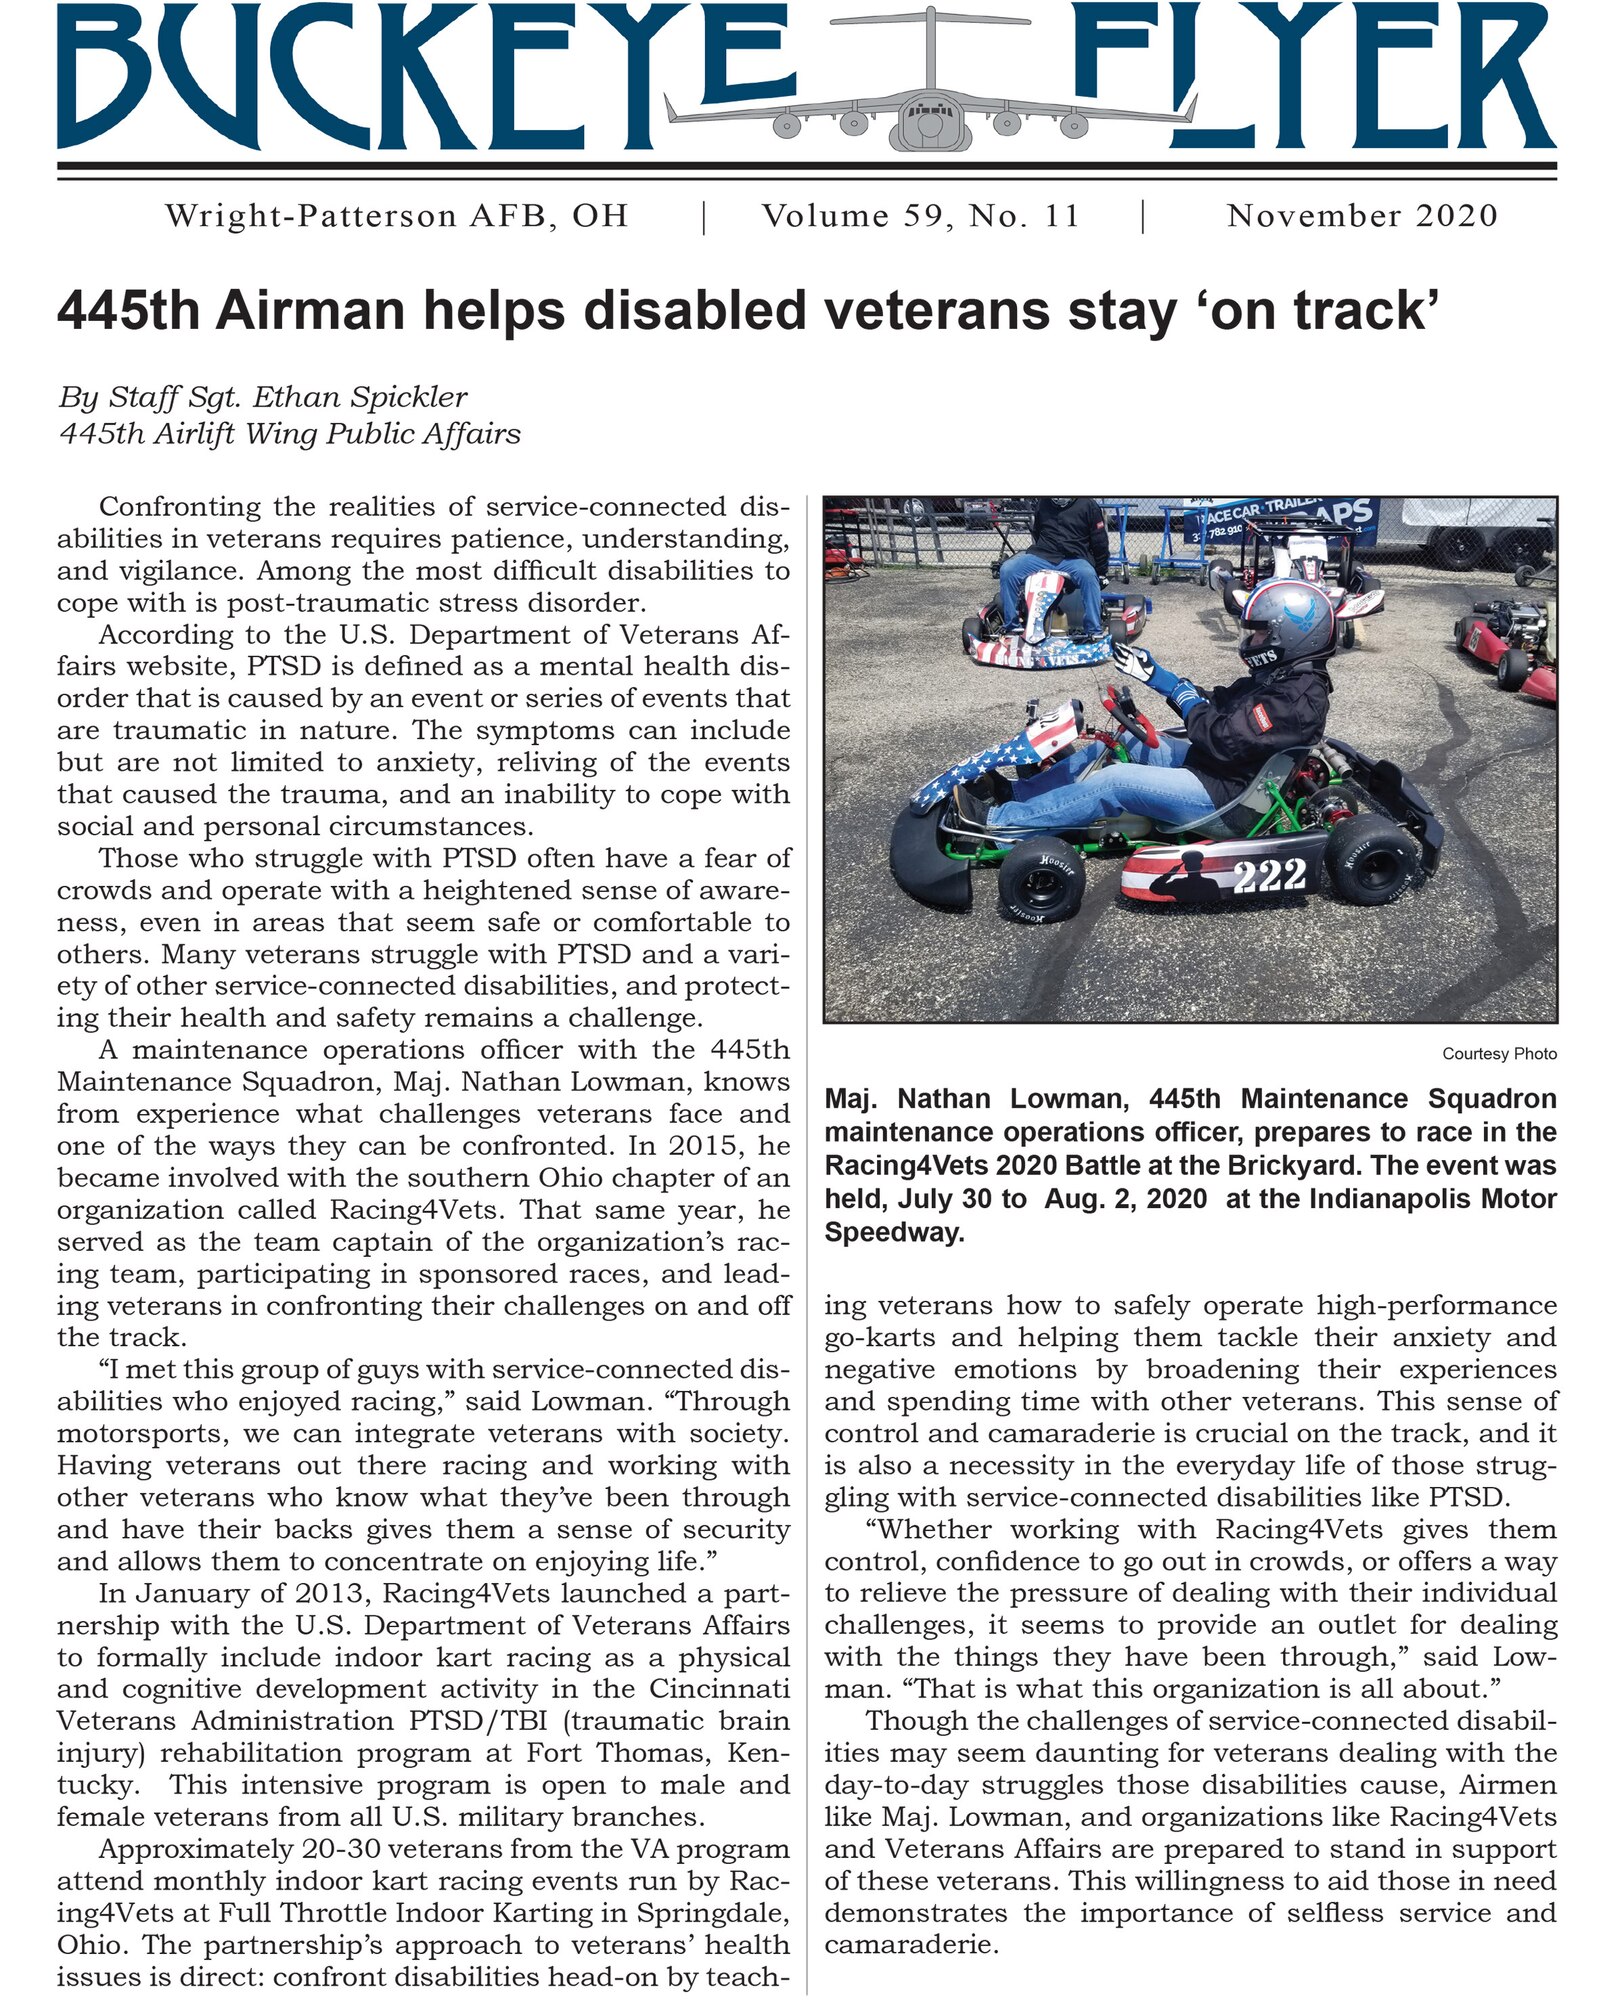 The November 2020 issue of the Buckeye Flyer is now available. The official publication of the 445th Airlift Wing includes eight pages of stories, photos and features pertaining to the 445th Airlift Wing, Air Force Reserve Command and the U.S. Air Force.